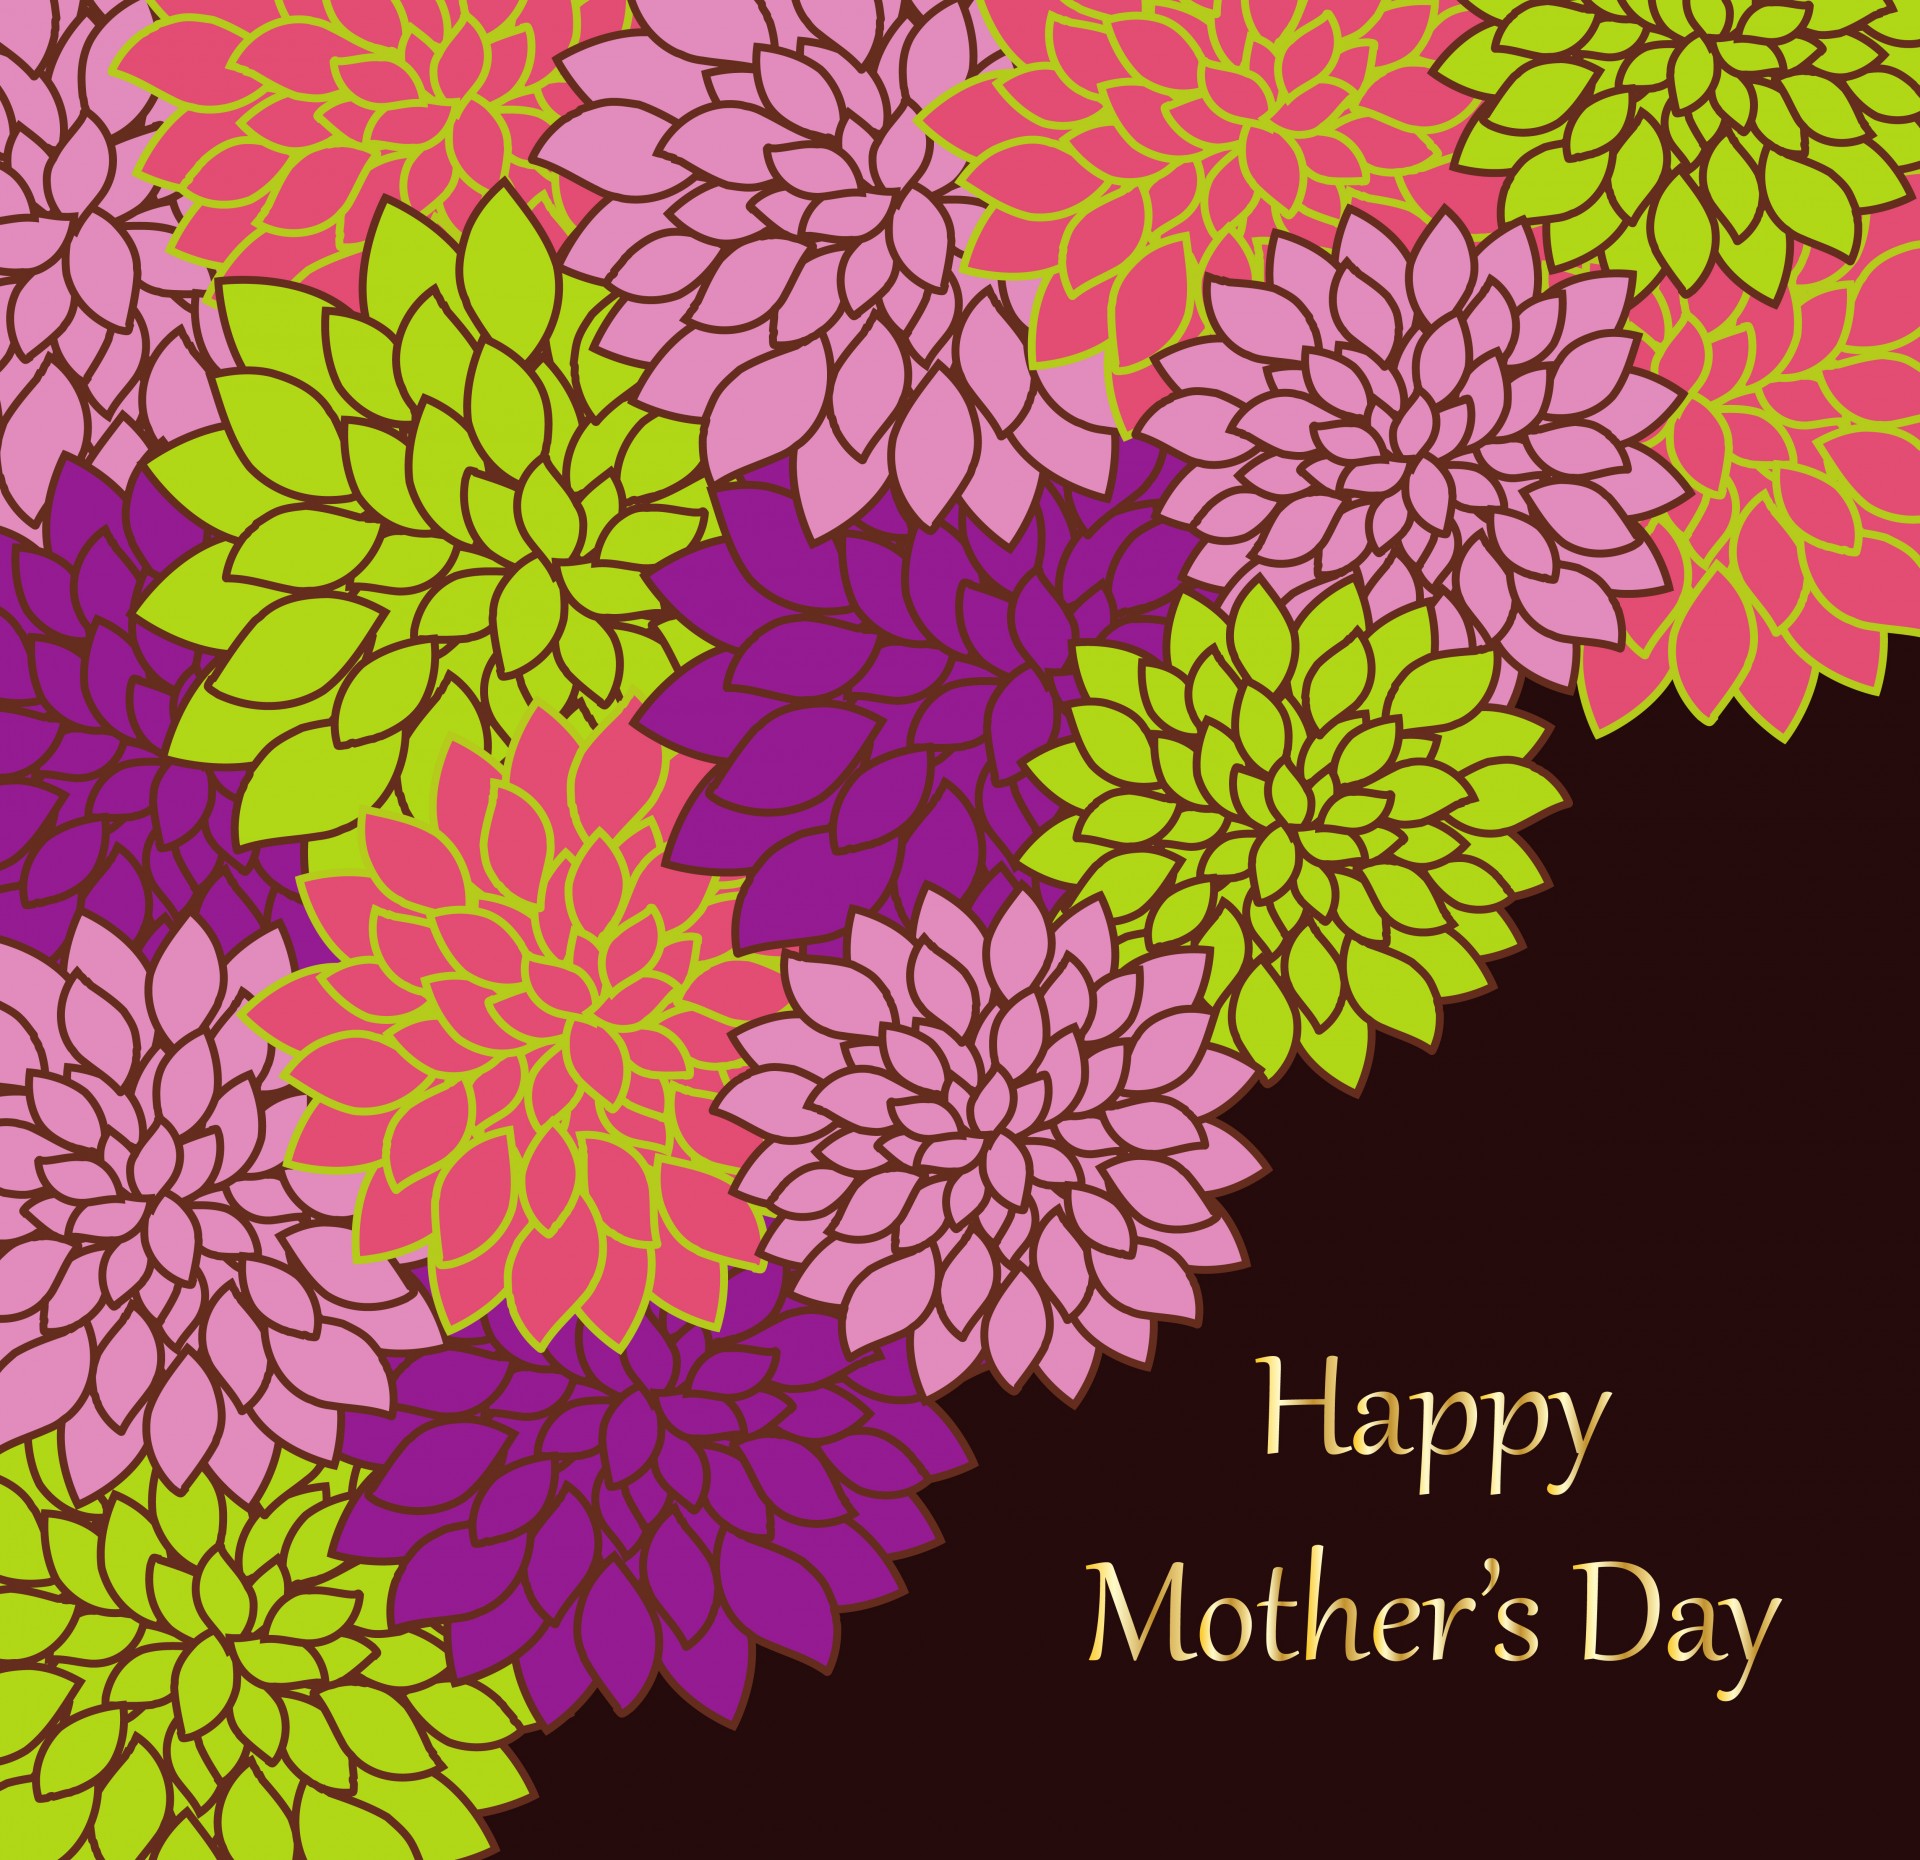 floral-mother-s-day-card-free-stock-photo-public-domain-pictures